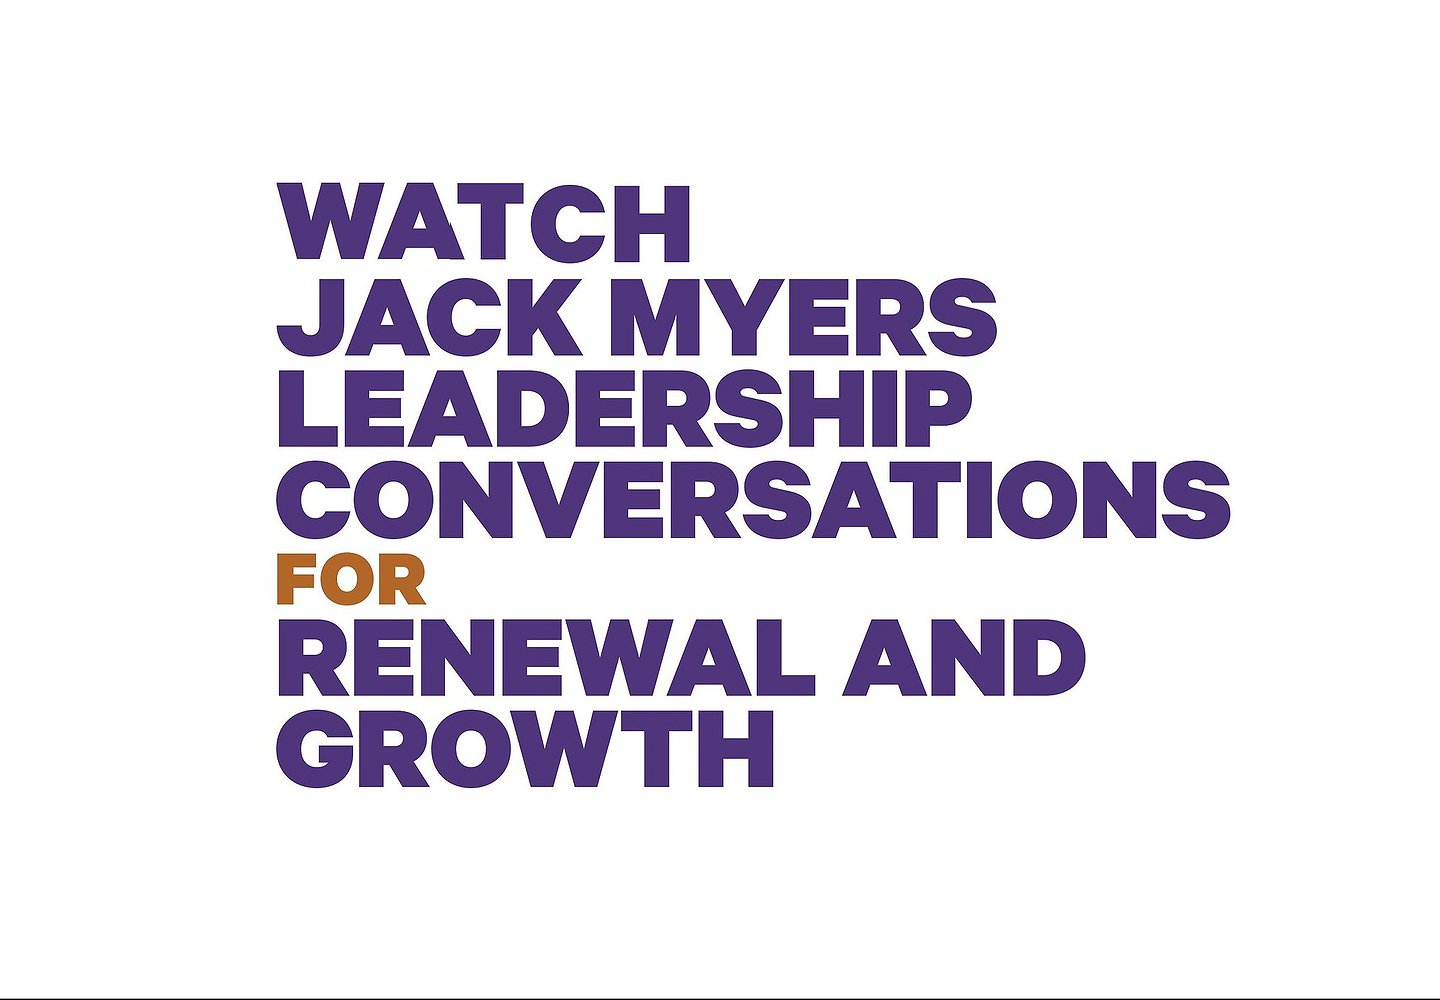 VIEW ALL LEADERSHIP CONVERSATIONS ON-DEMAND HERE